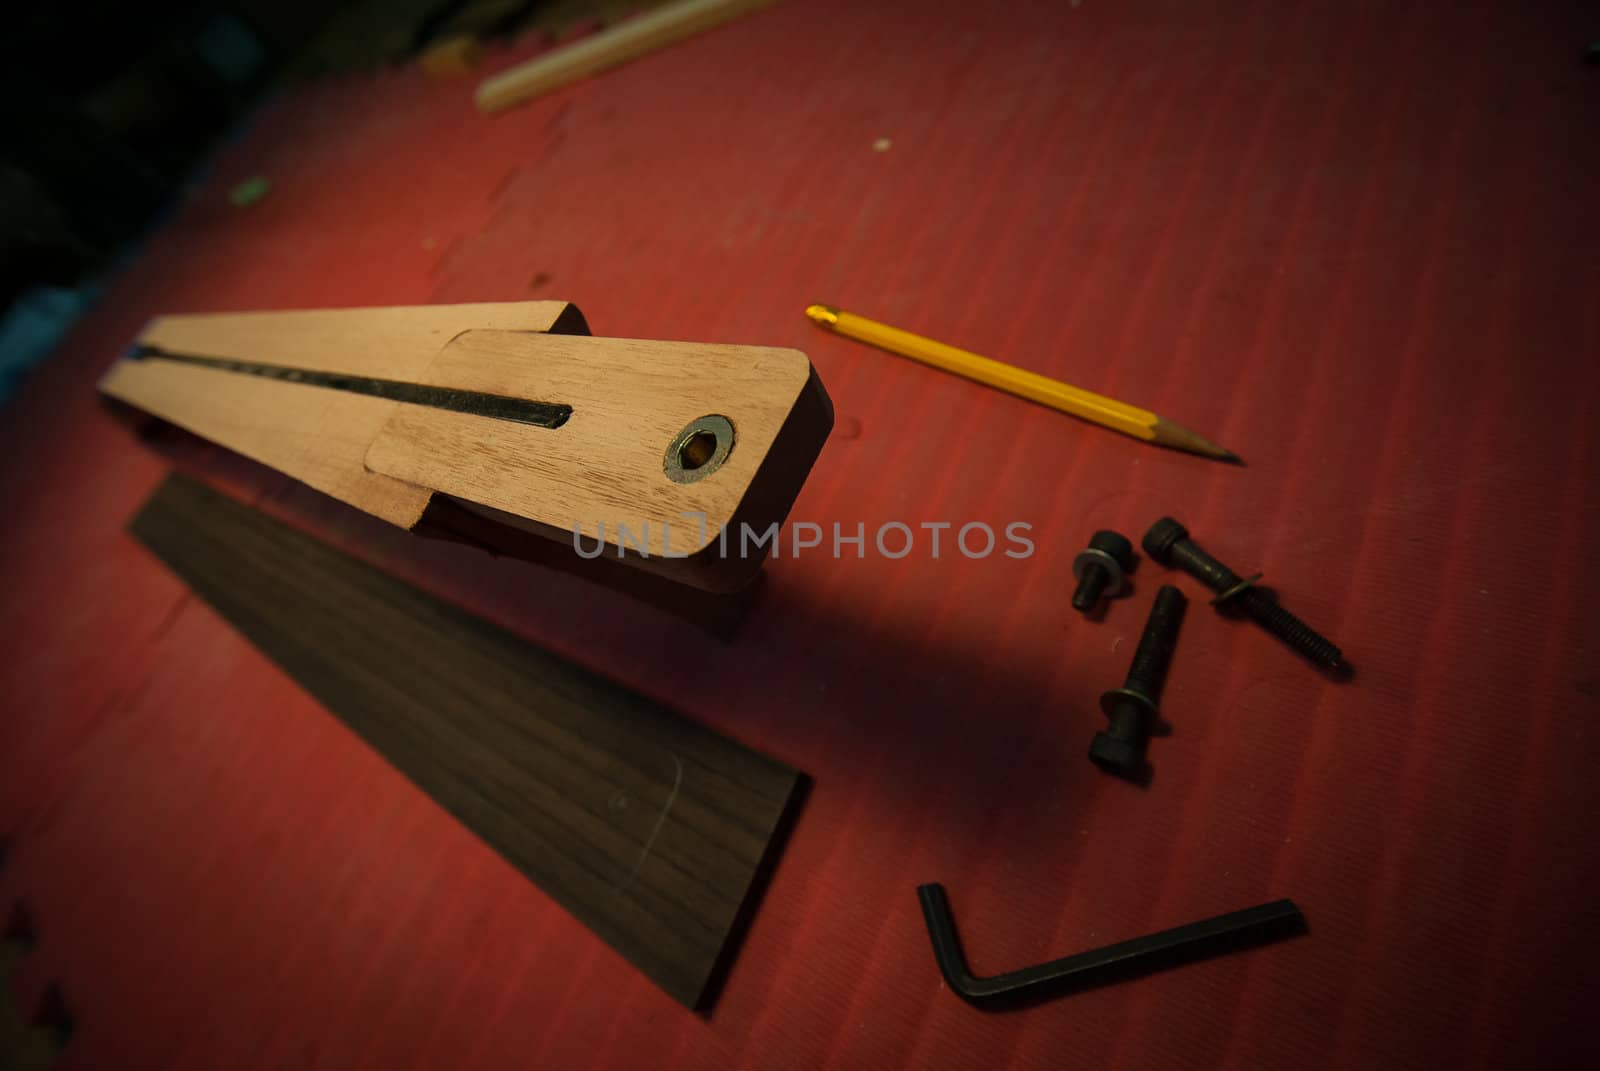 Constructing a guitar by oliverjw